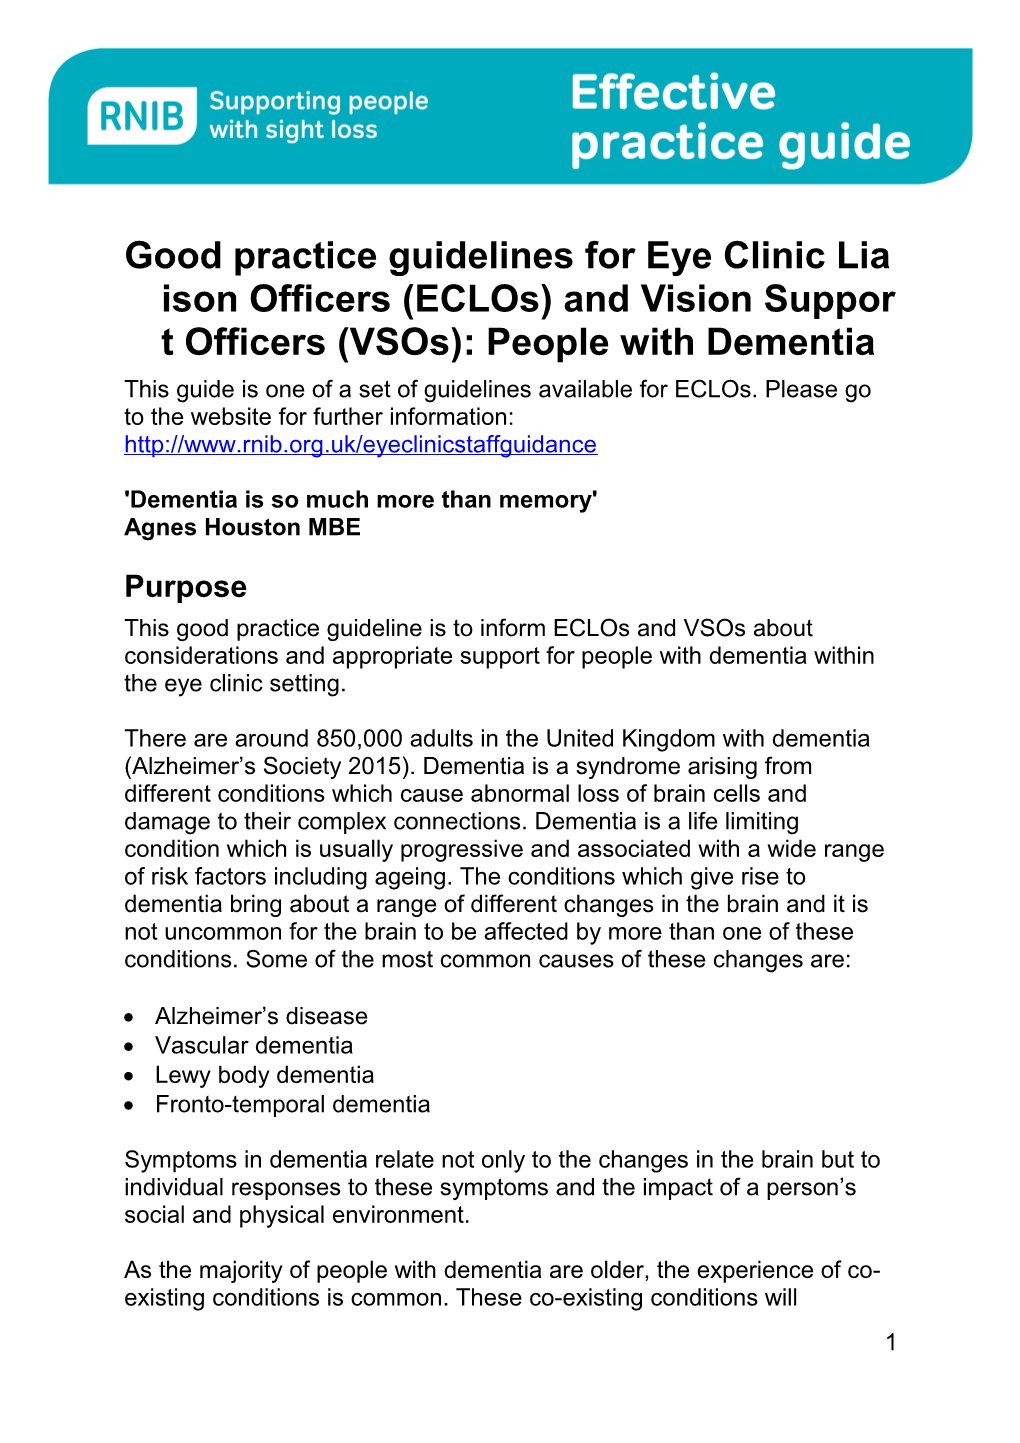 Good Practice Guidelines for Vision Support Officer's (VSO's Eclos)